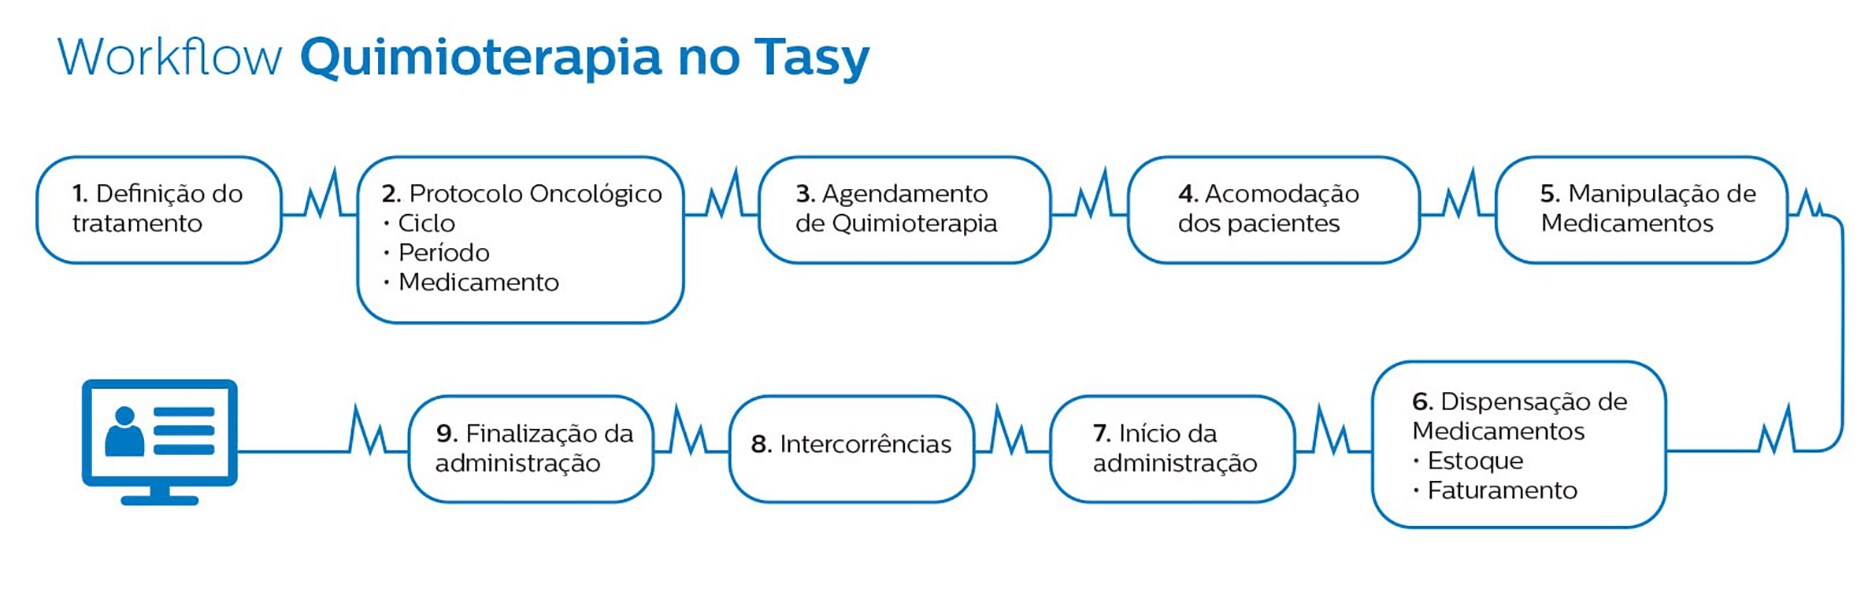 Tasy Oncology workflow